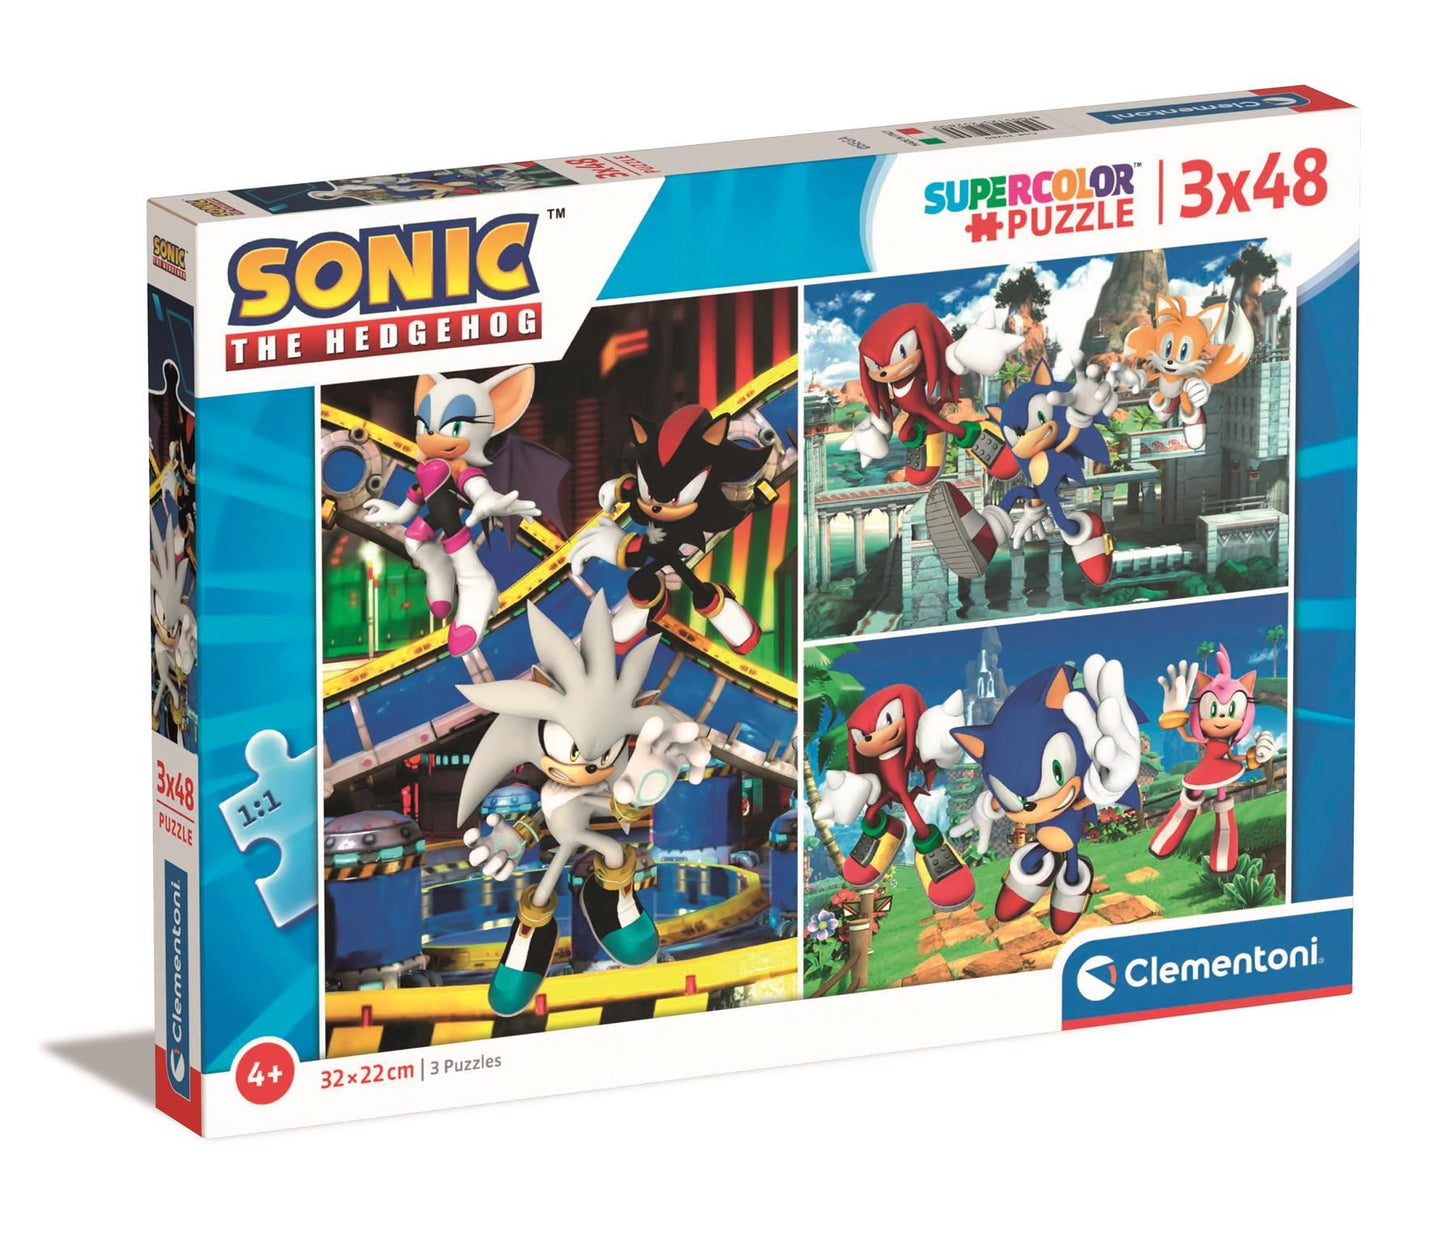 Sonic the Hedgehog Jigsaw Puzzle 3x48 Pieces